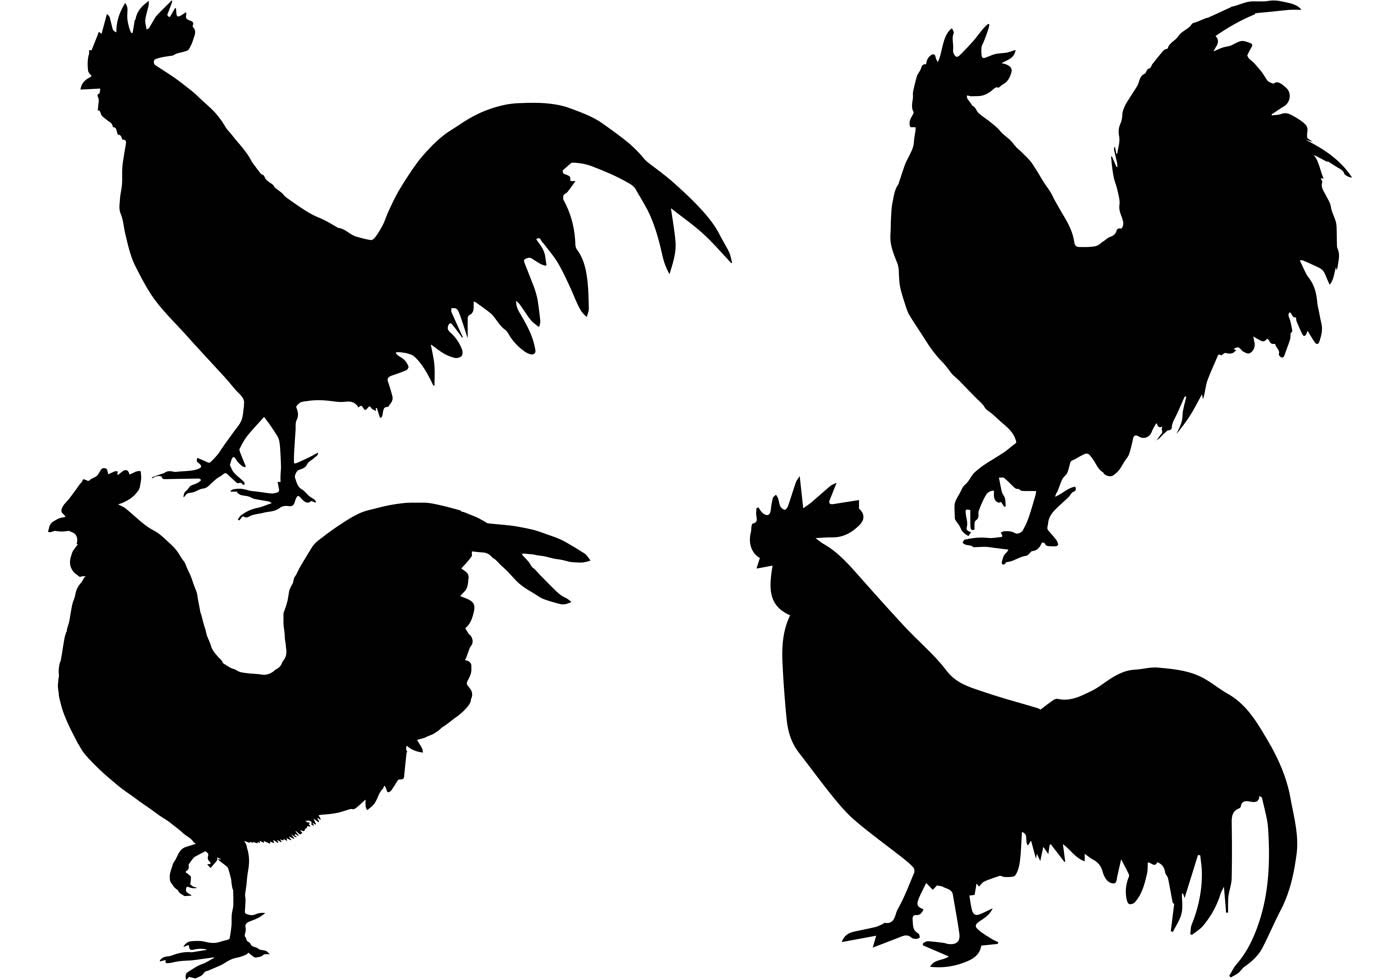 Free Vector Rooster Set - Download Free Vector Art, Stock Graphics ...